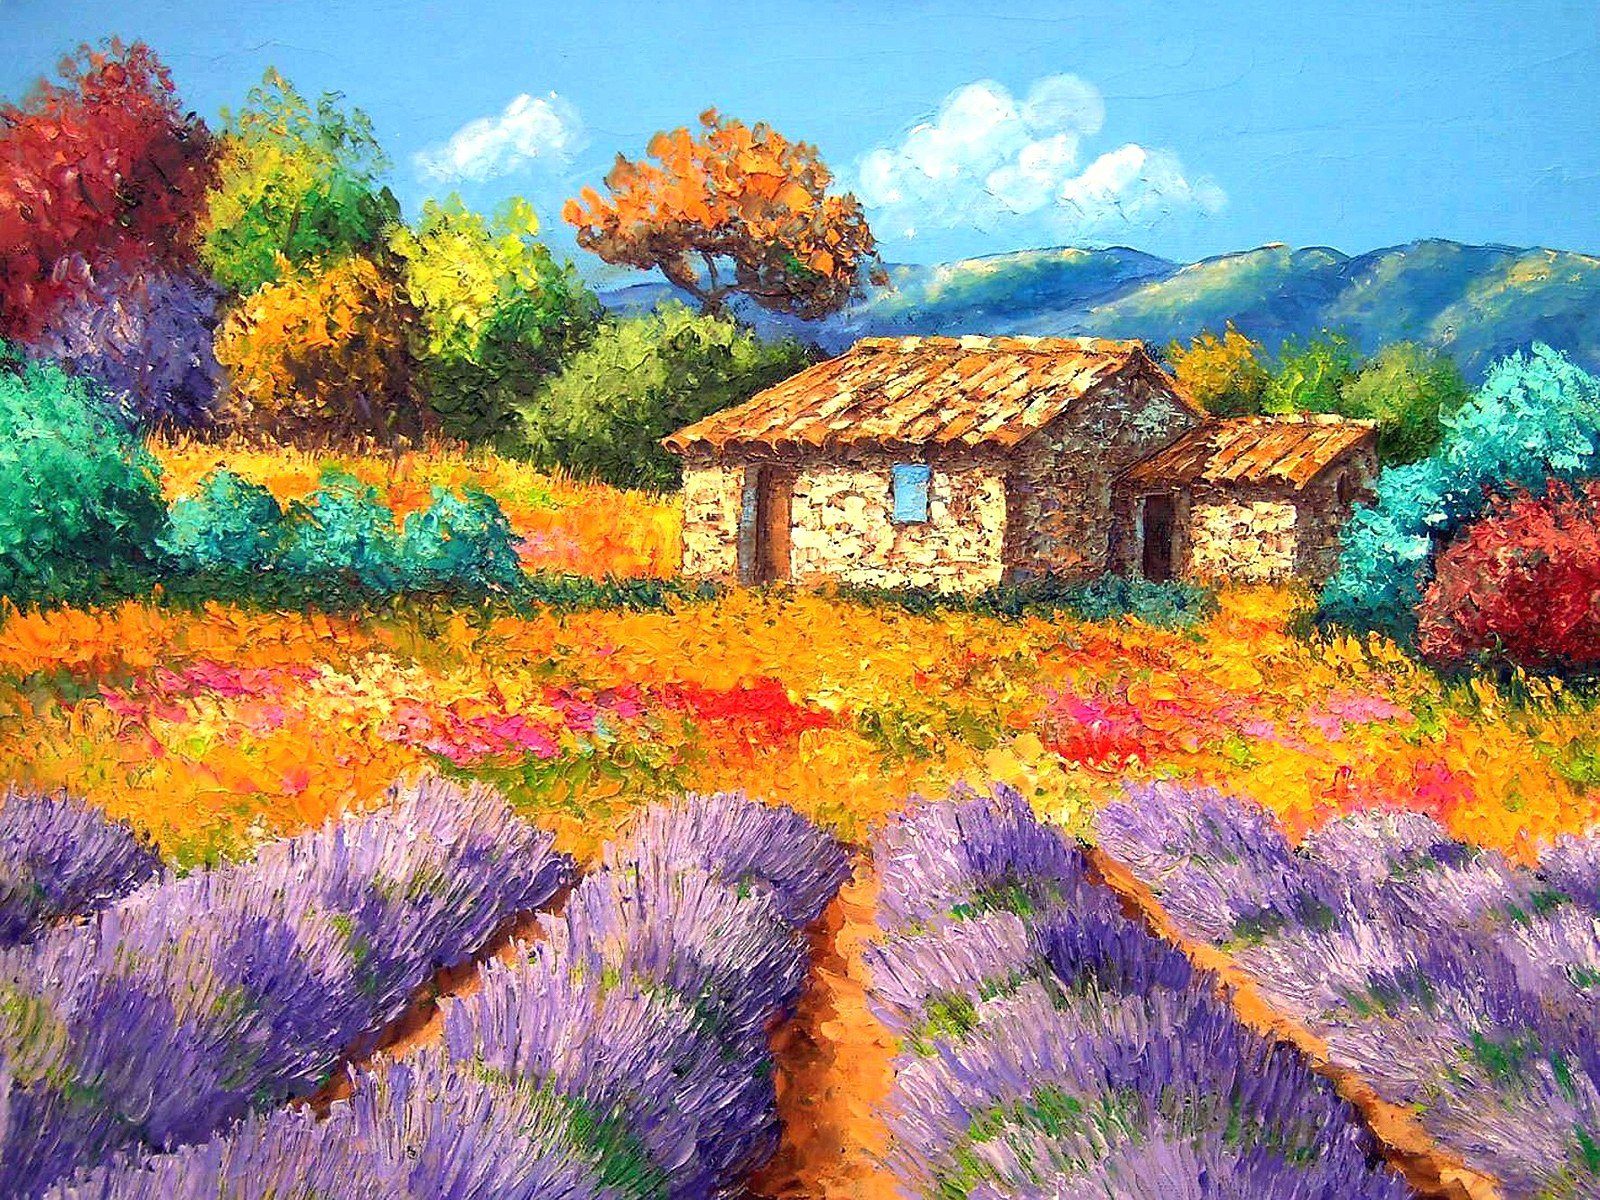 Art painting wallpapers Wallpapers - Free art painting wallpapers